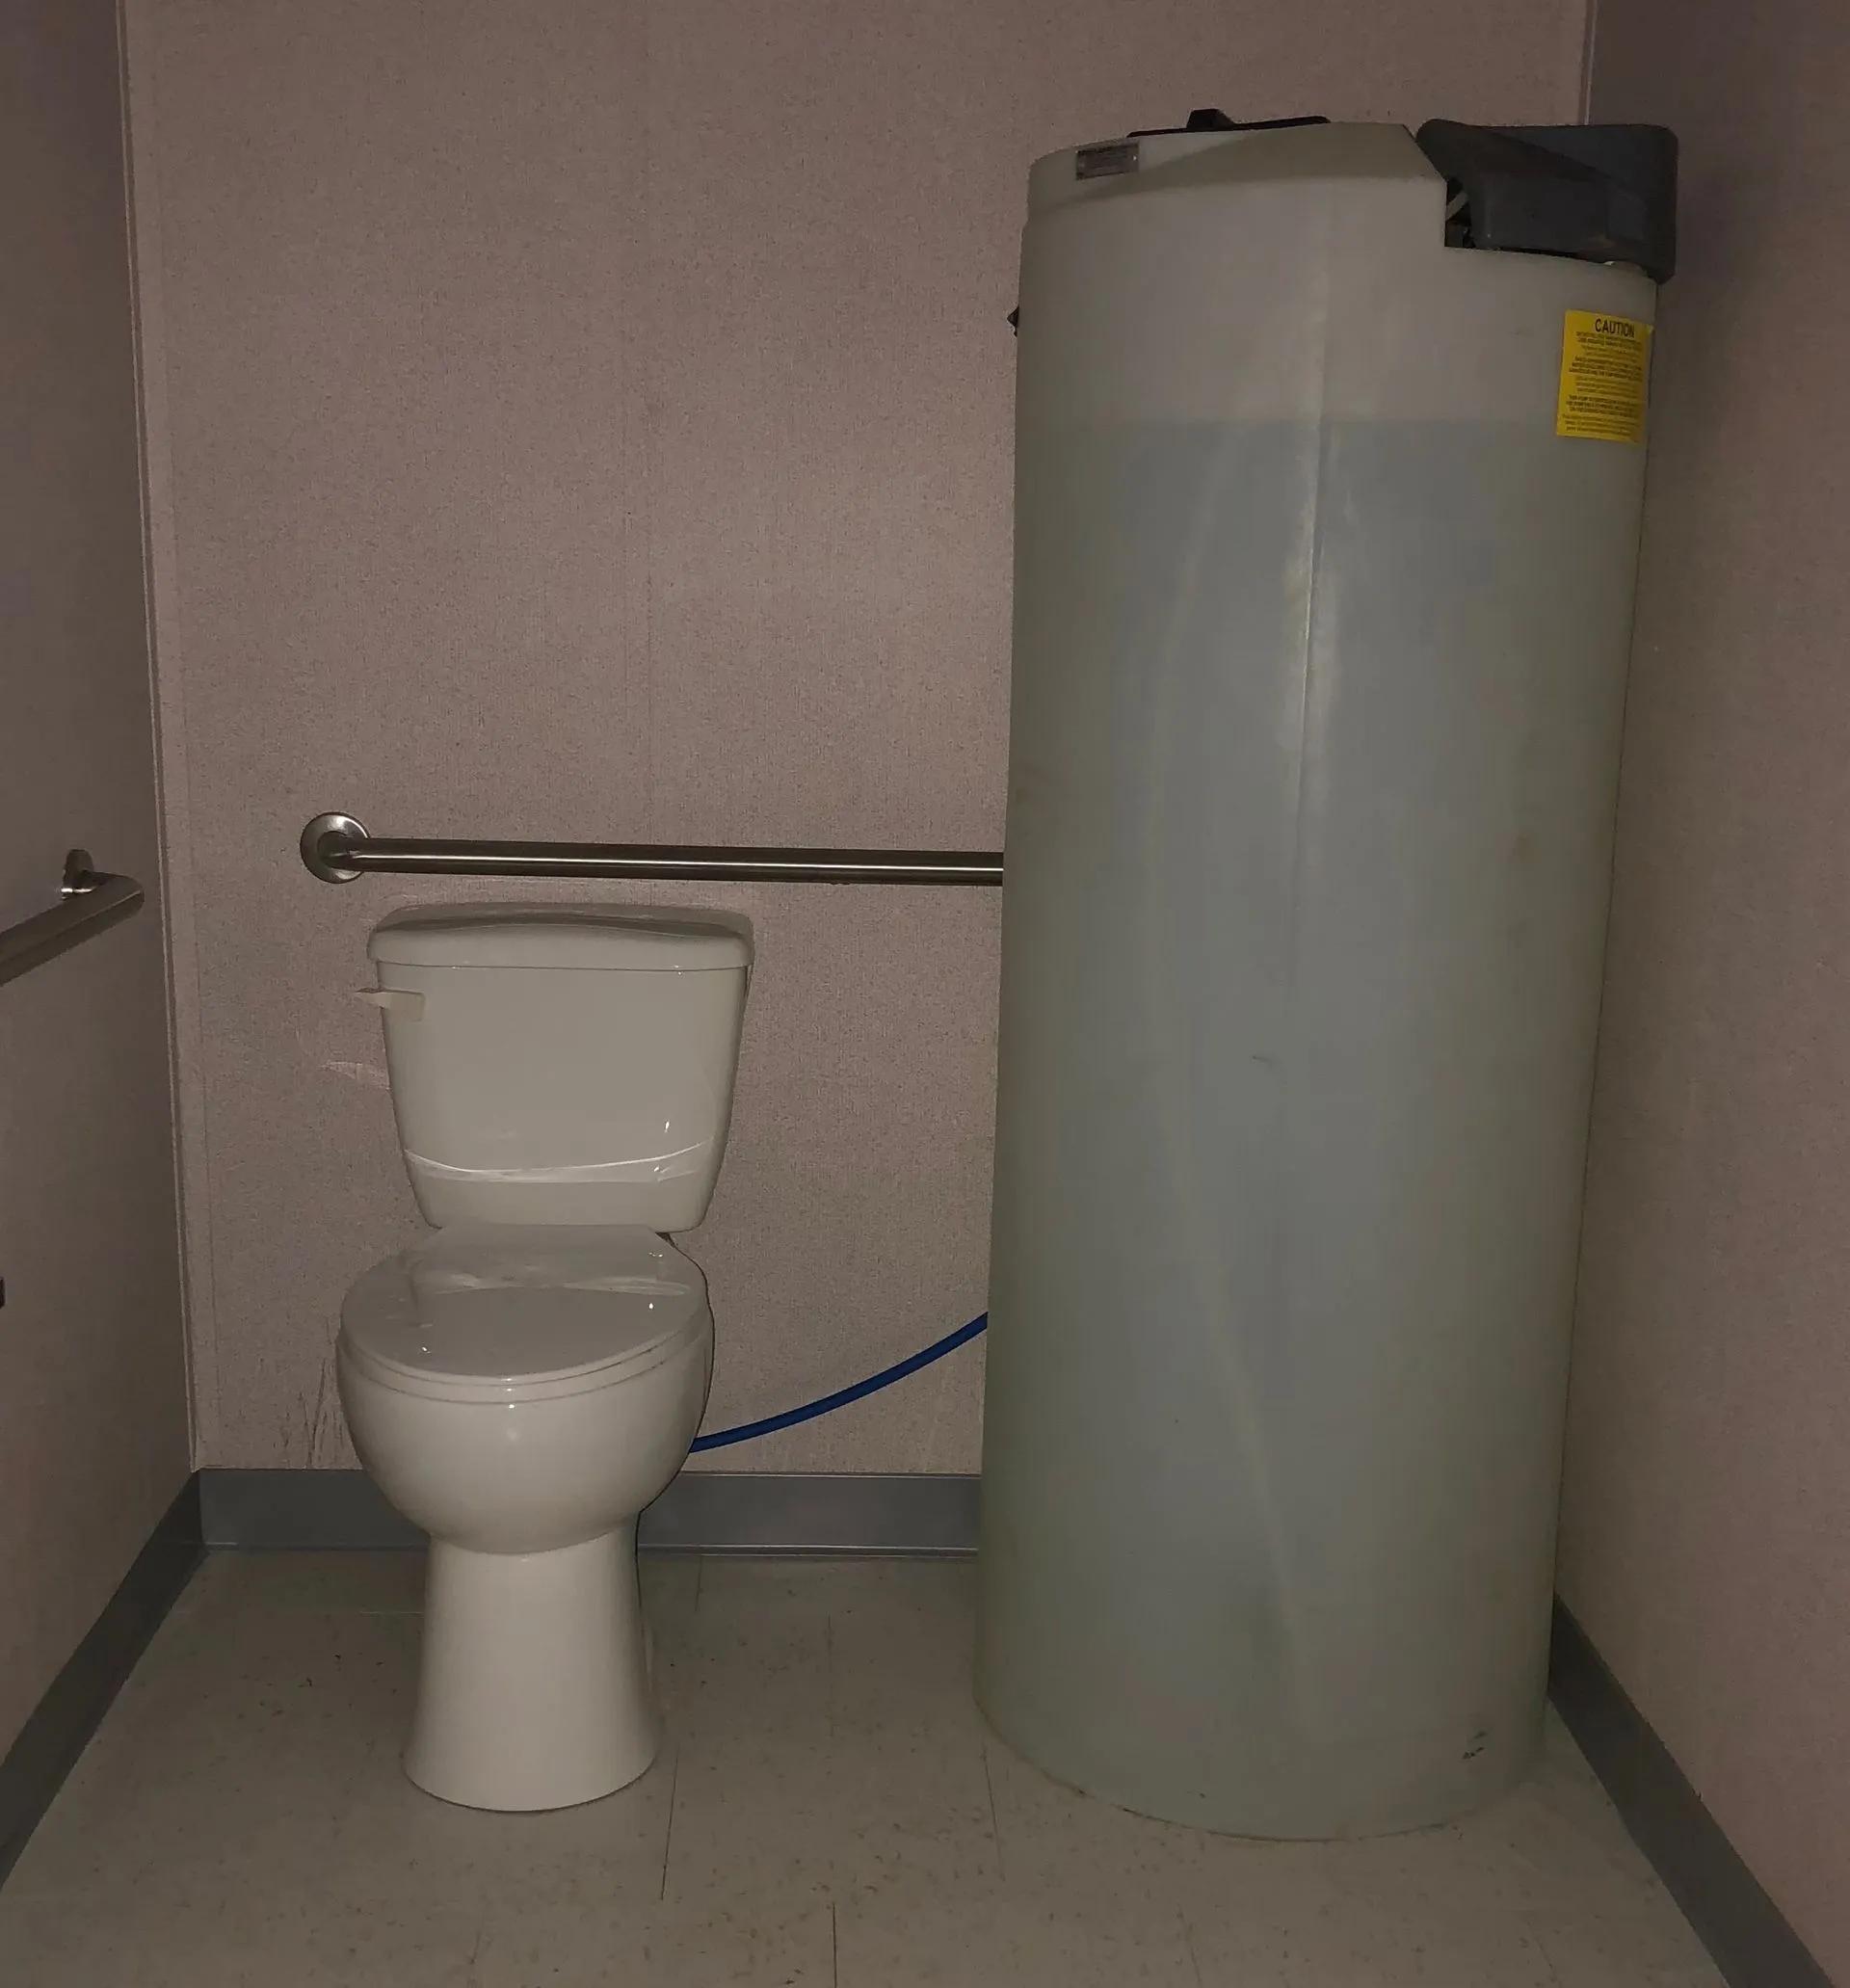 Inside view of a portable restroom trailer with gravity flush water tank